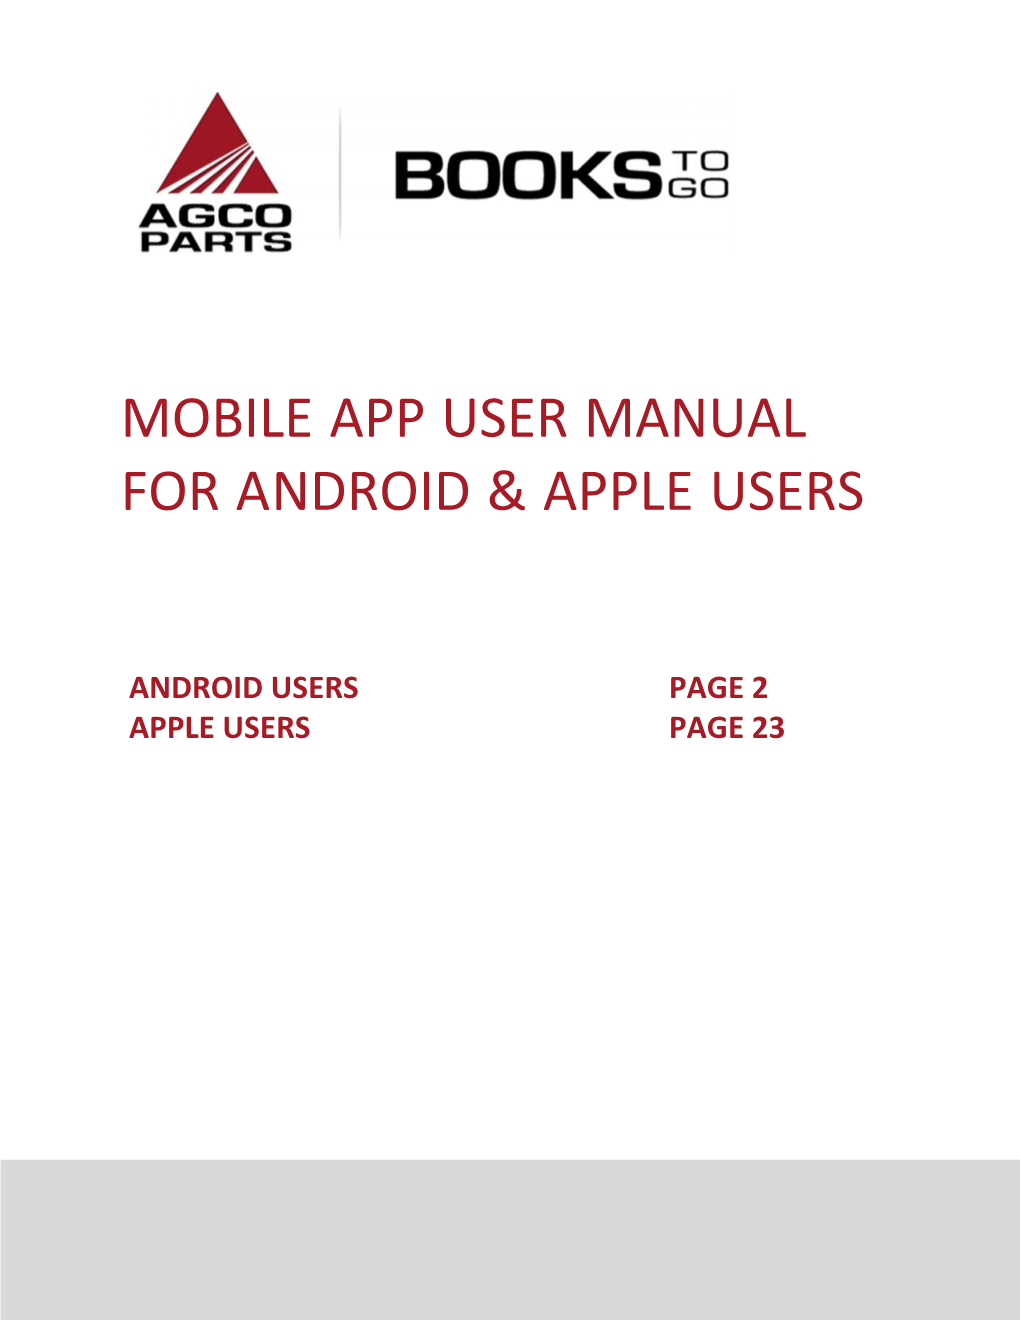 Parts Books User Guide DOWNLOAD